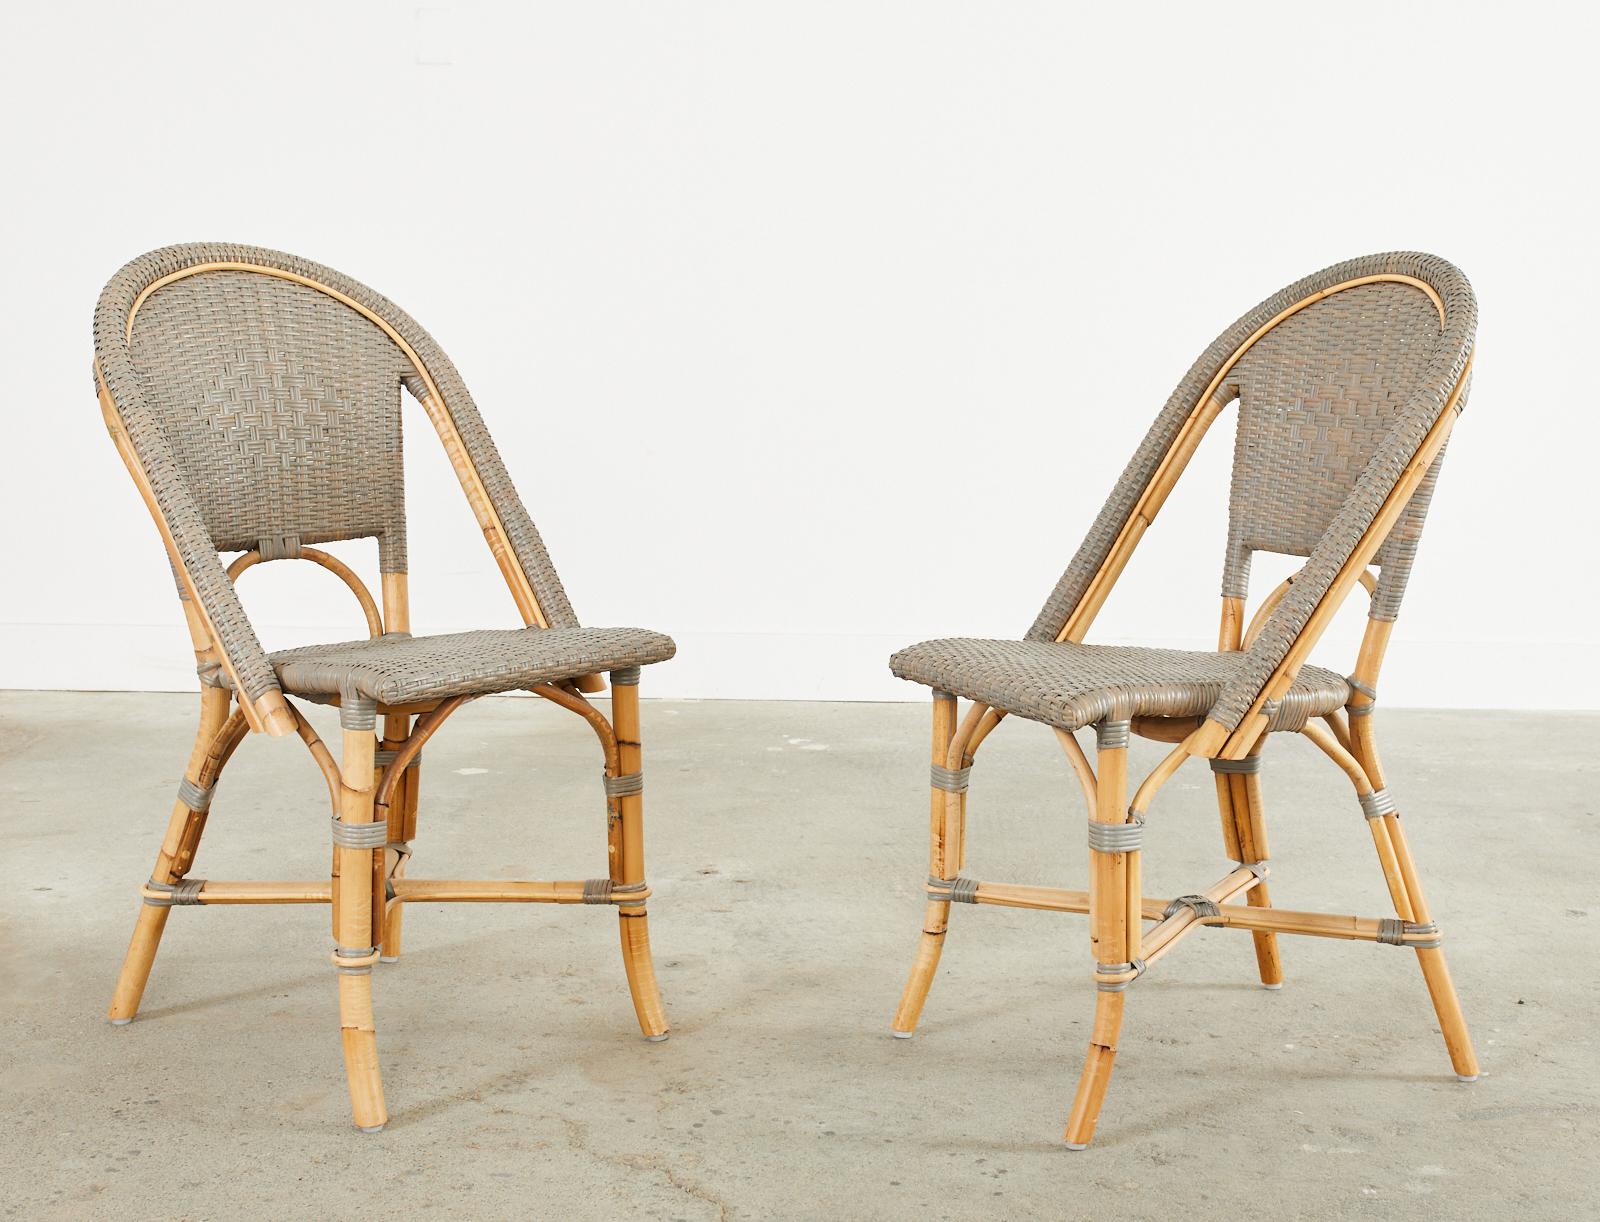 Woven Set of Forty Serena and Lily Rattan Wicker Bistro Dining Chairs